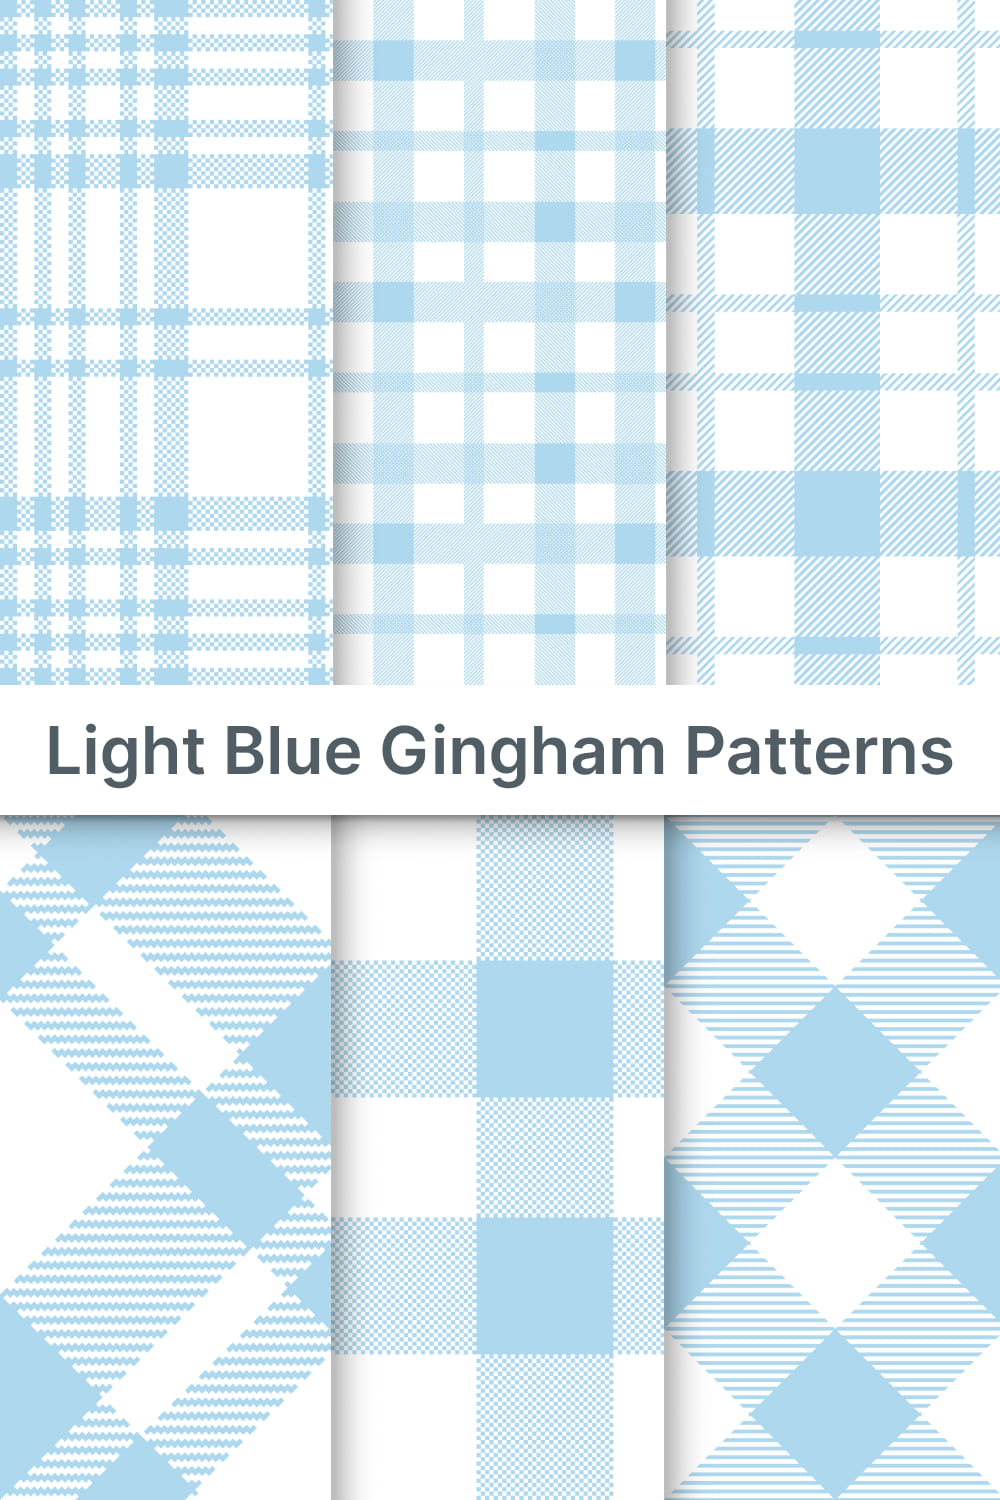 Pattern with light blue gingham prints.